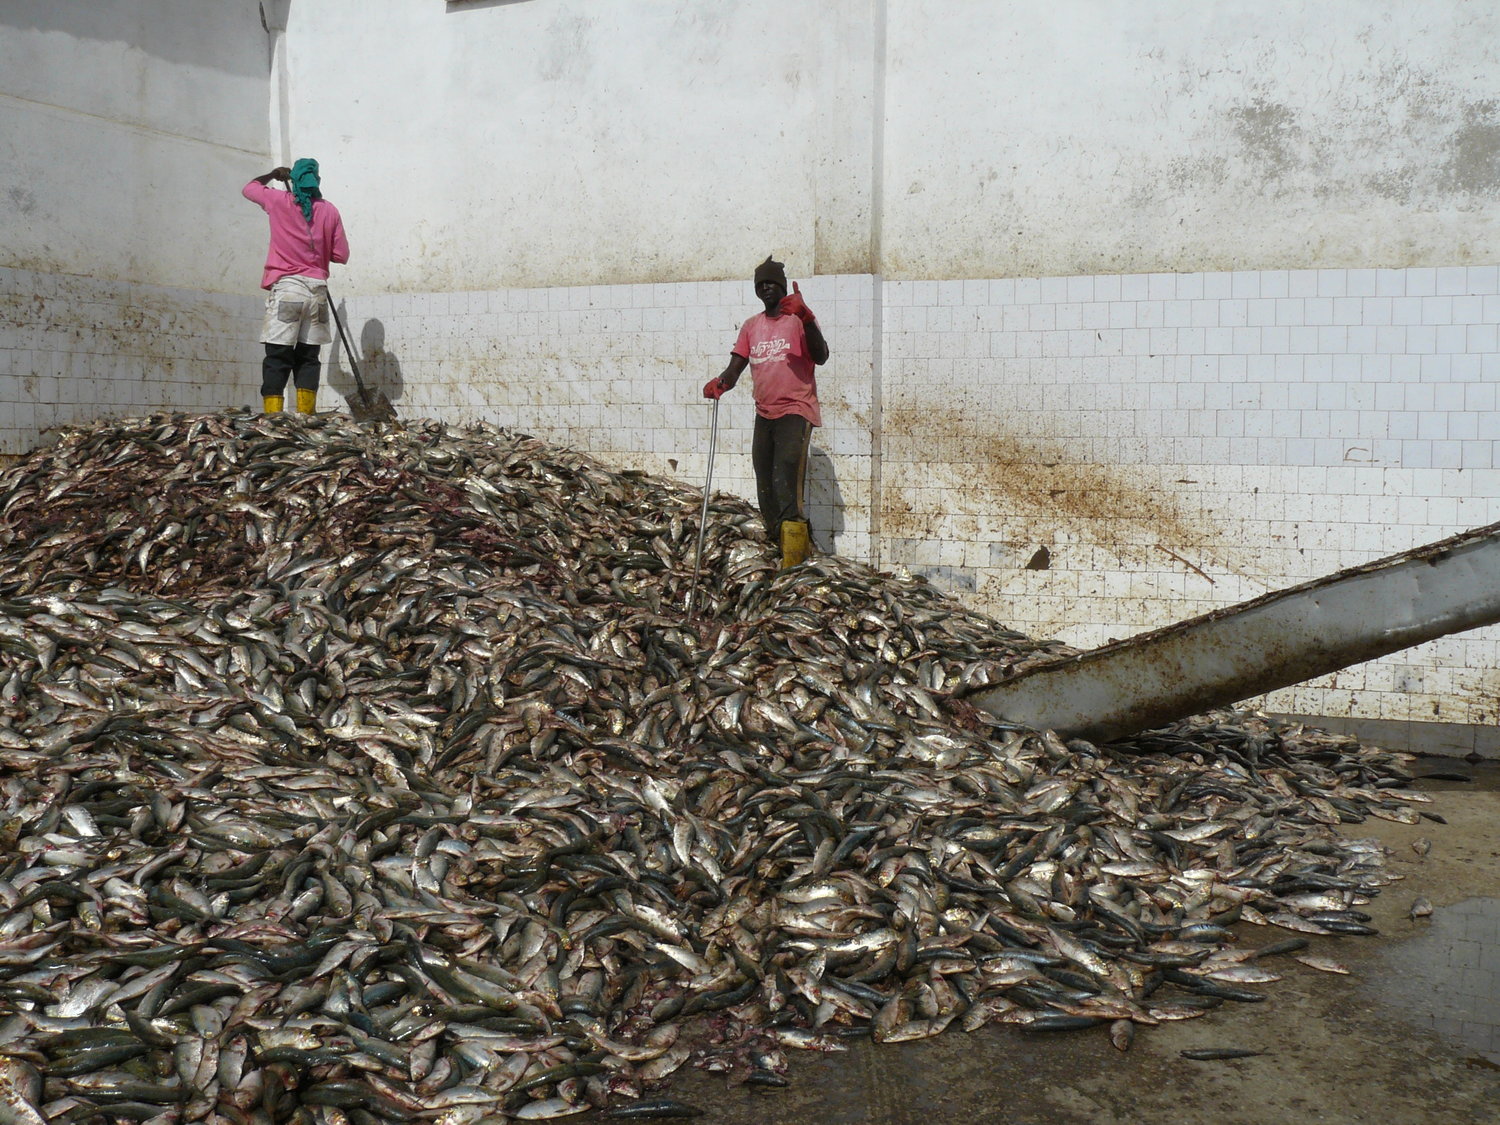 Export of Fish Meal from Africa a Threat to Millions in Africa, say Greenpeace